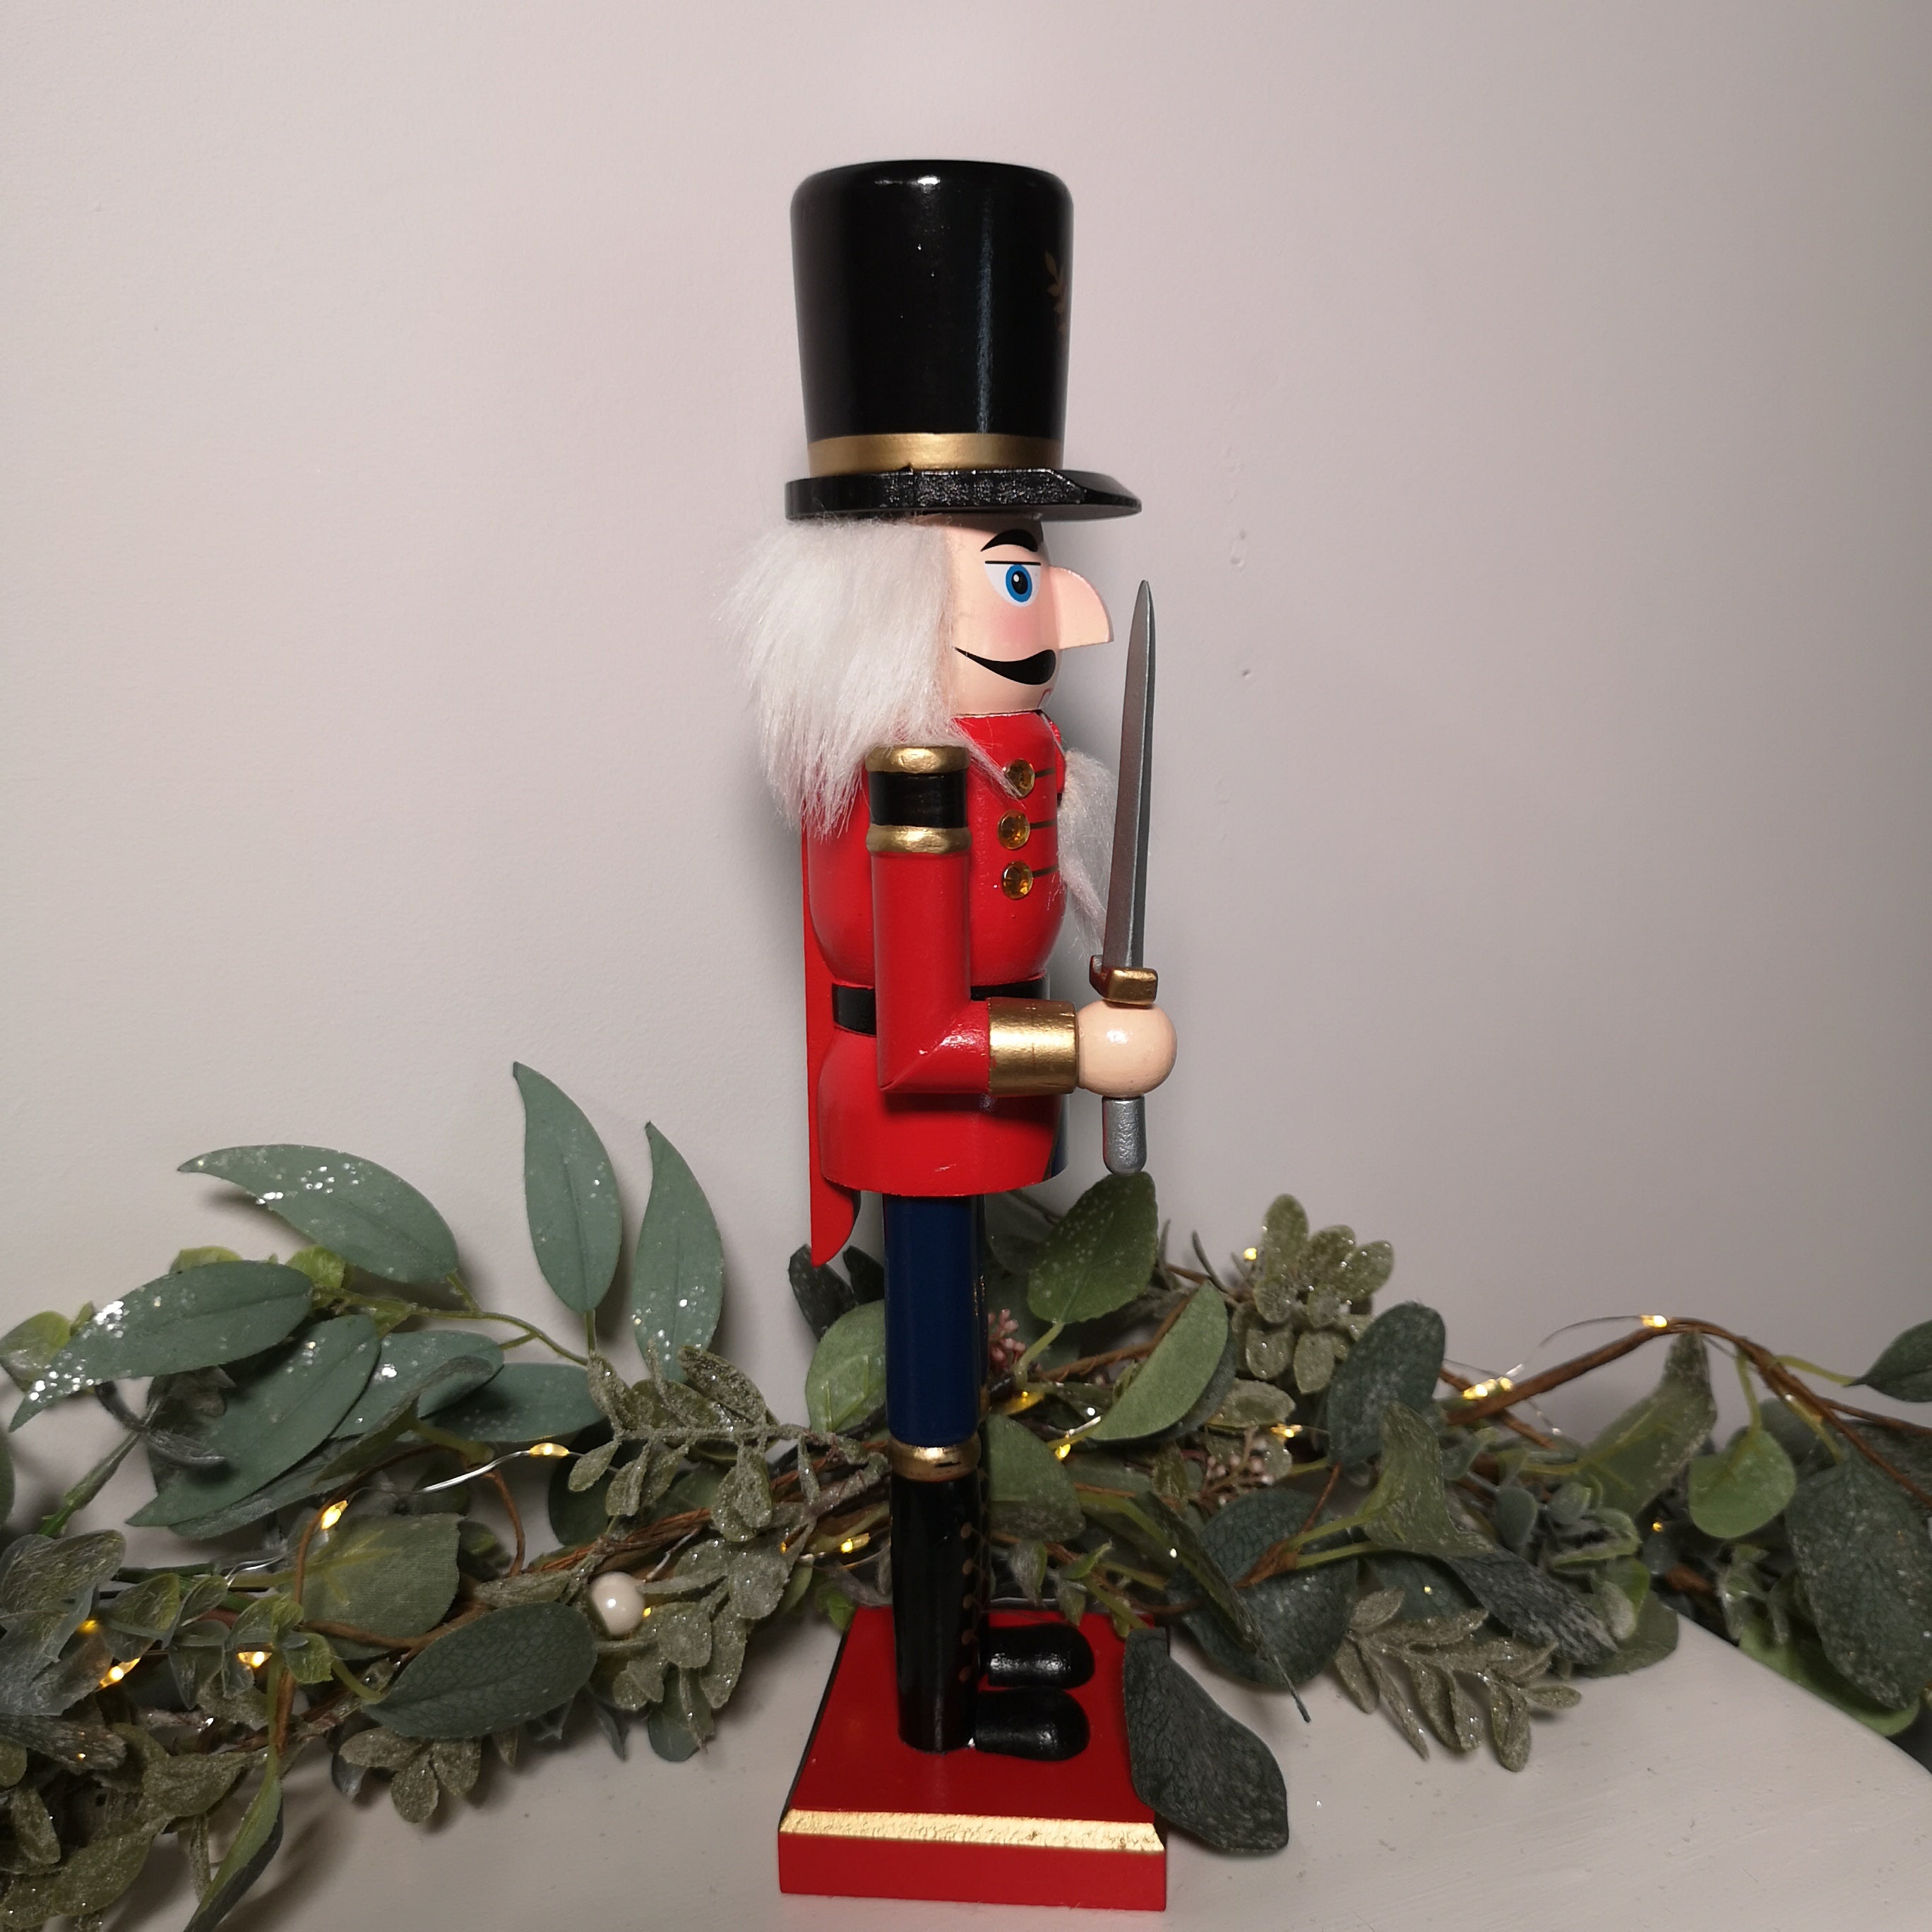 30cm Wooden Christmas Nutcracker Soldier Decoration with Red Body